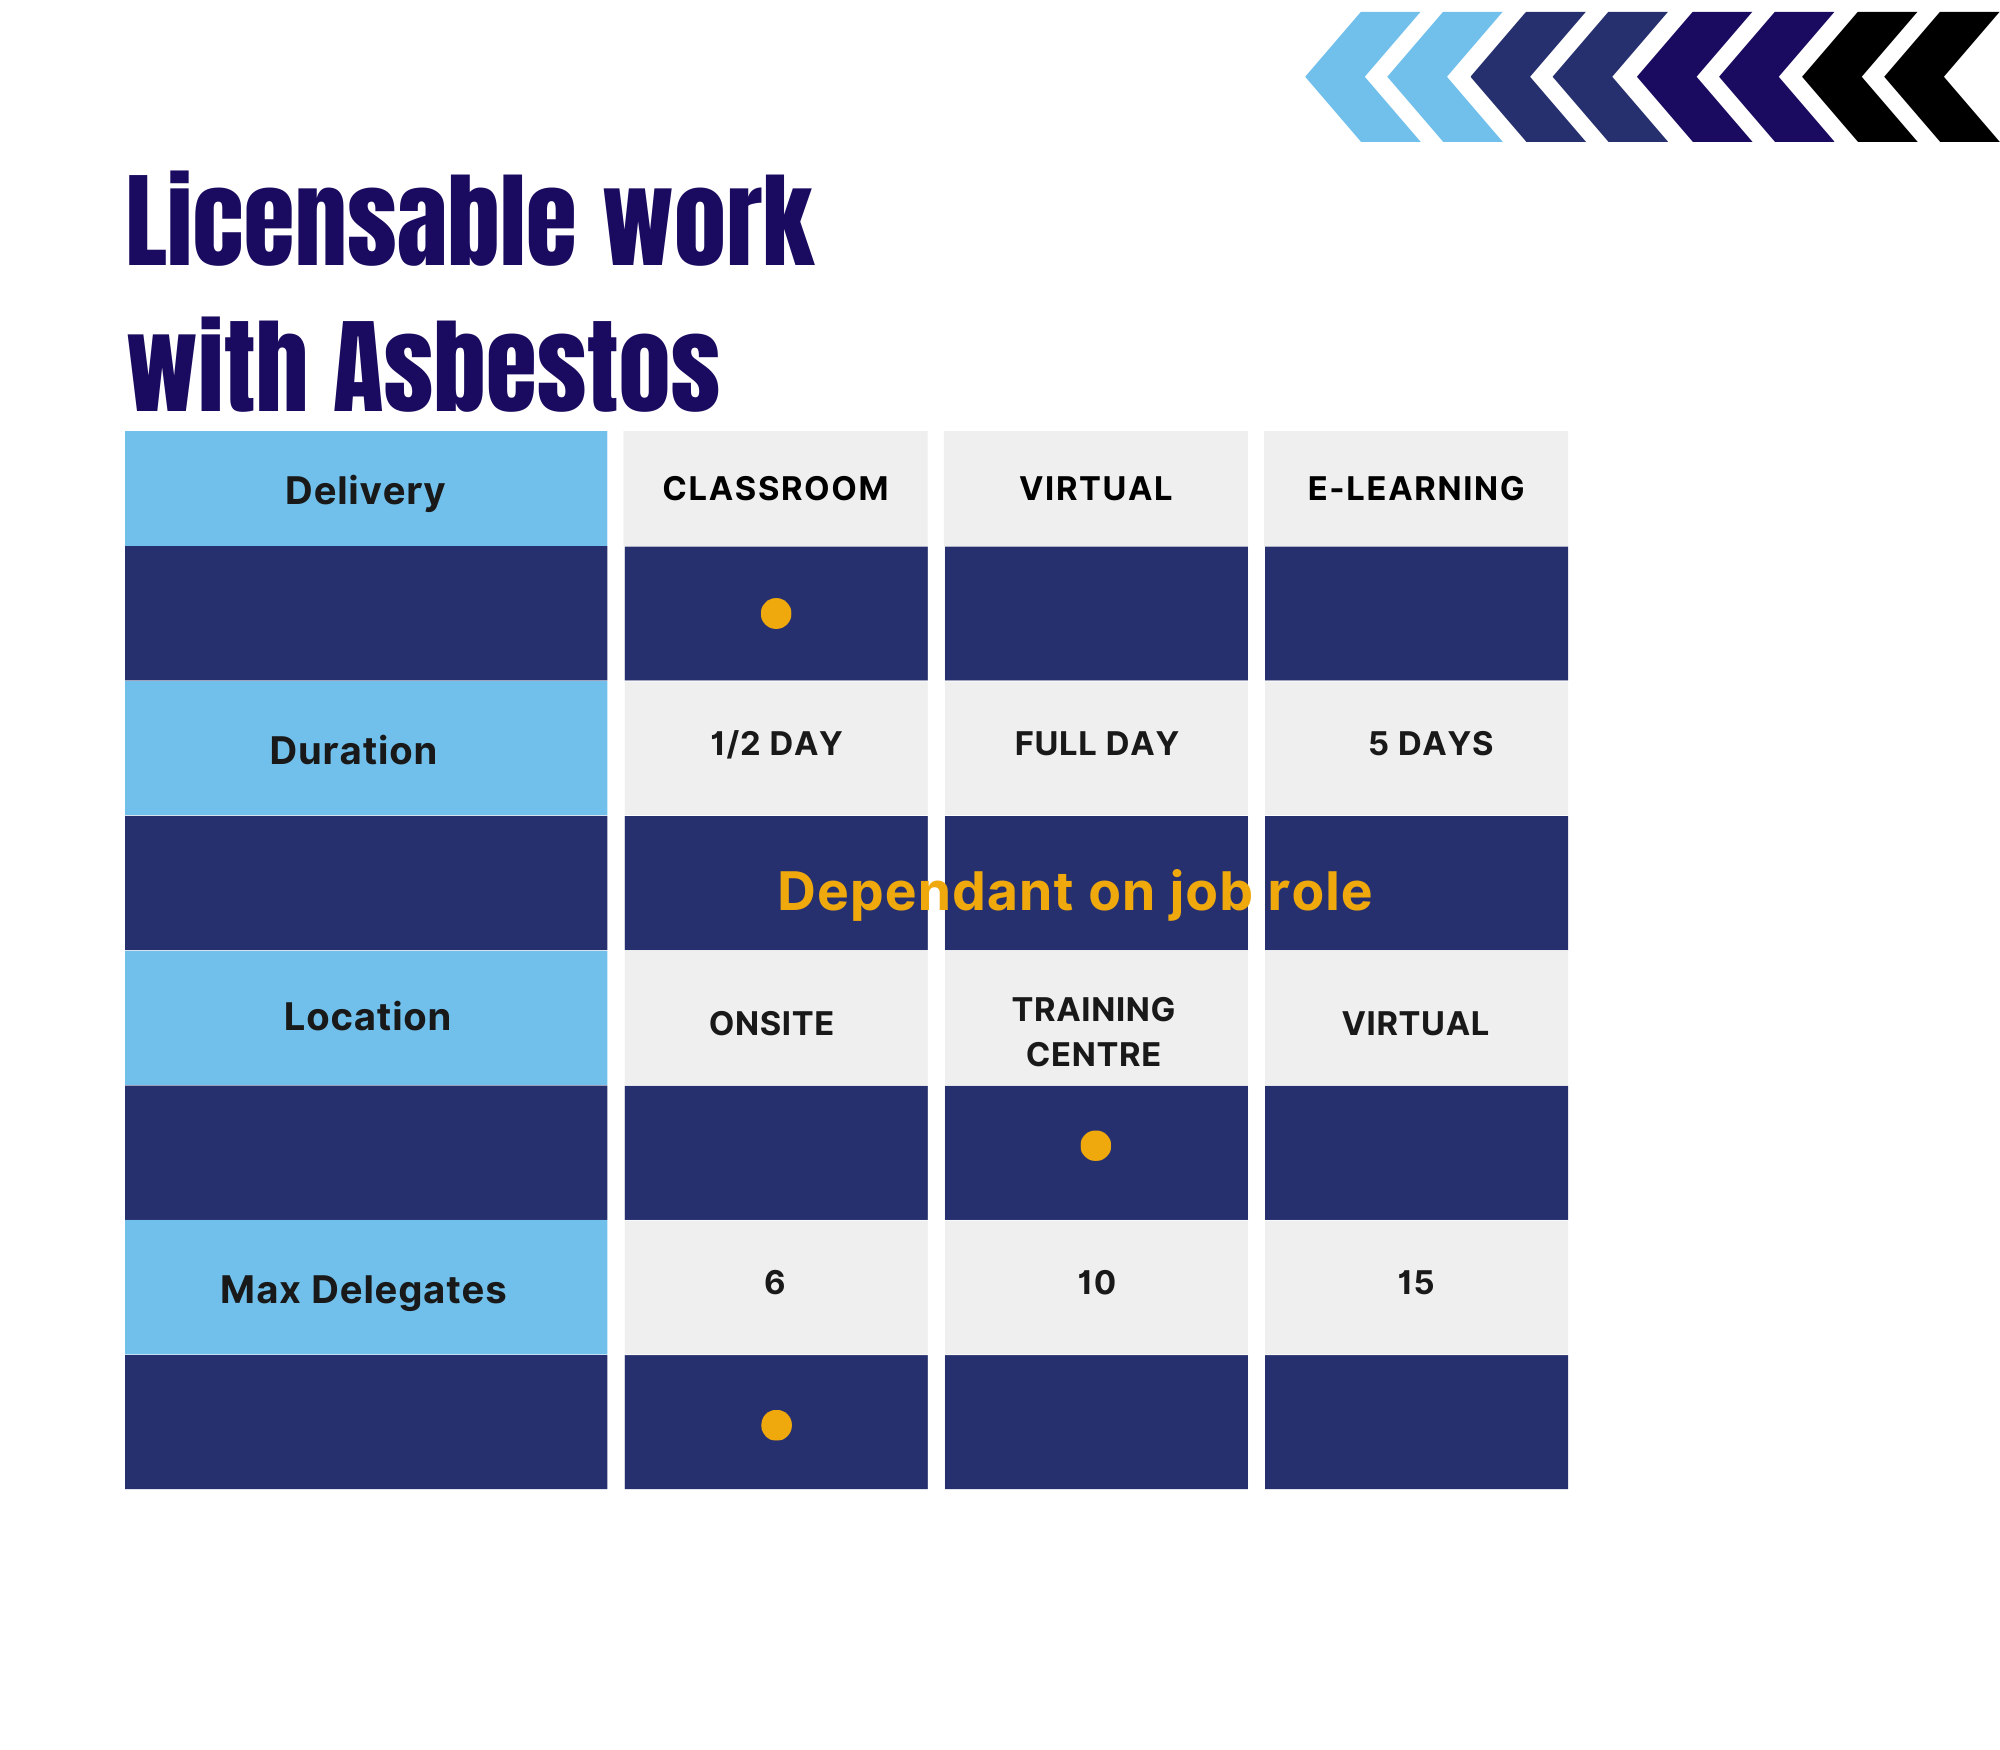 Licensable work with Asbestos